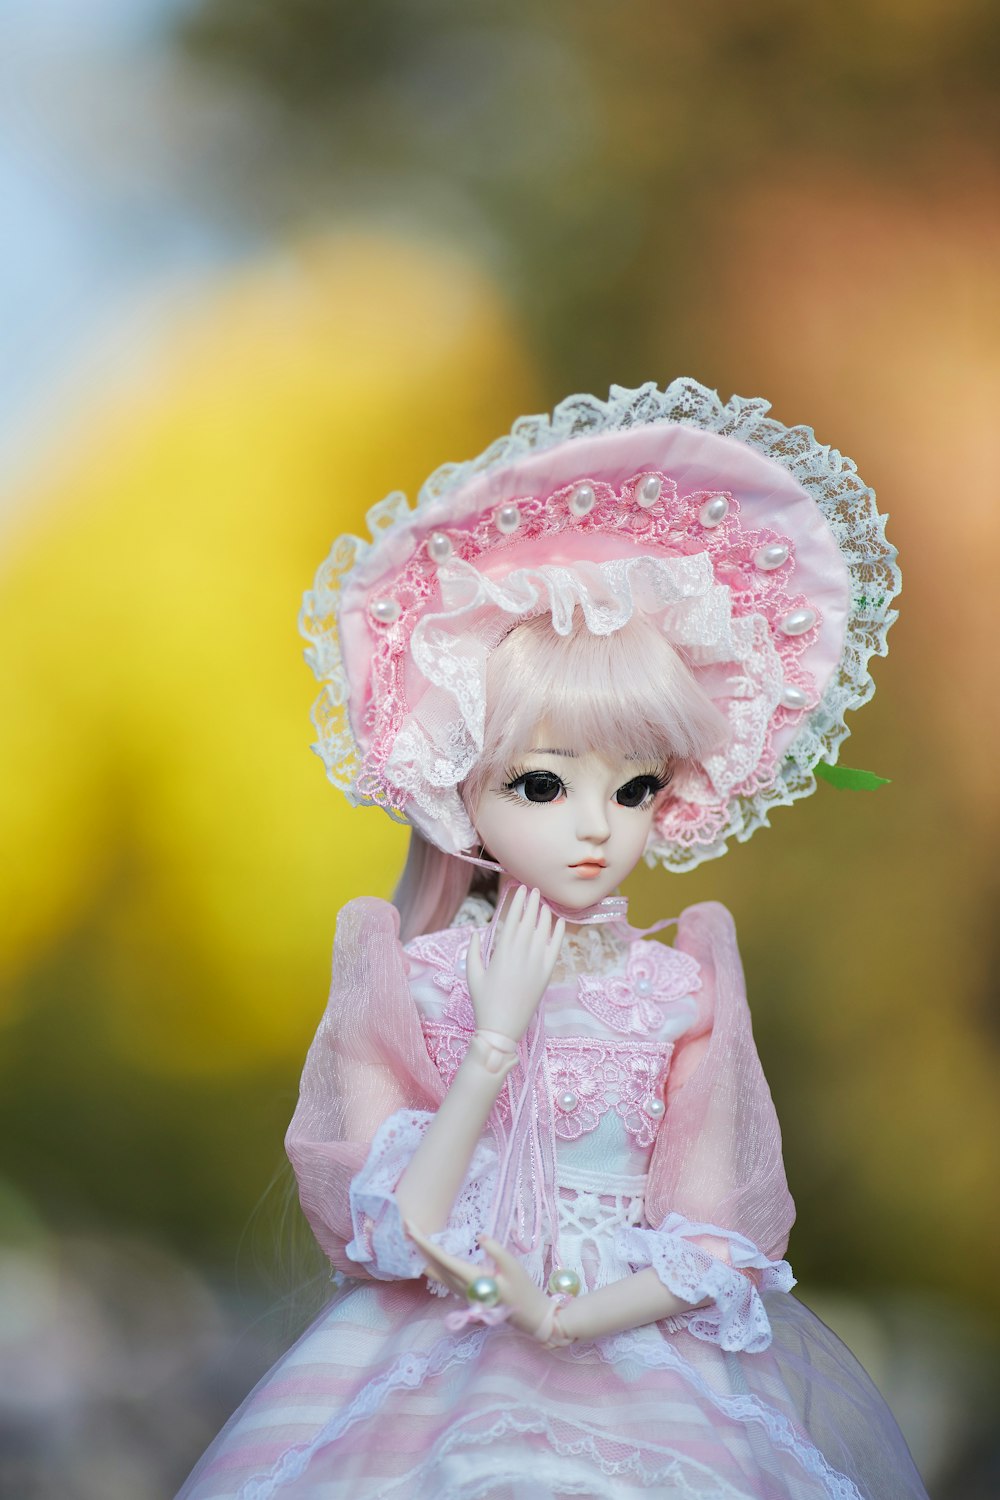 A Stunning Compilation of Over 999 Beautiful Doll Images in Full 4K Resolution